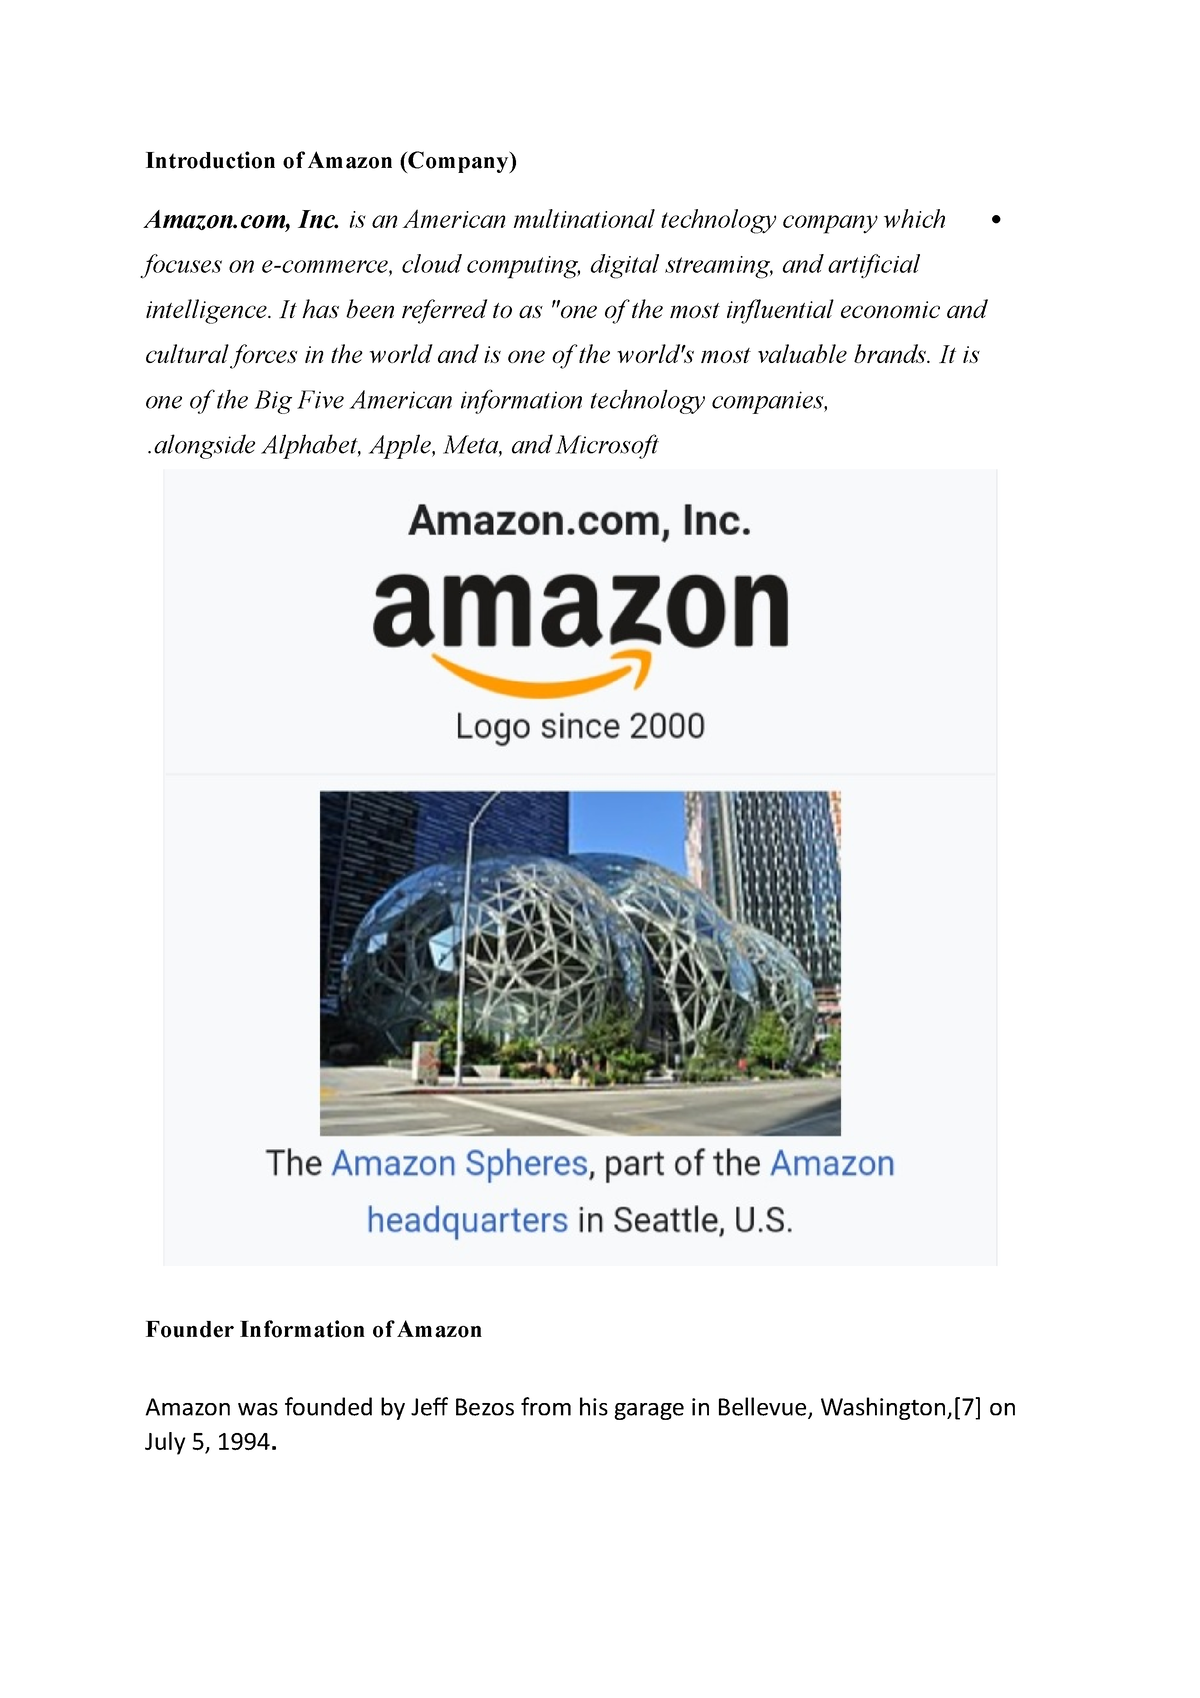 research paper about amazon company